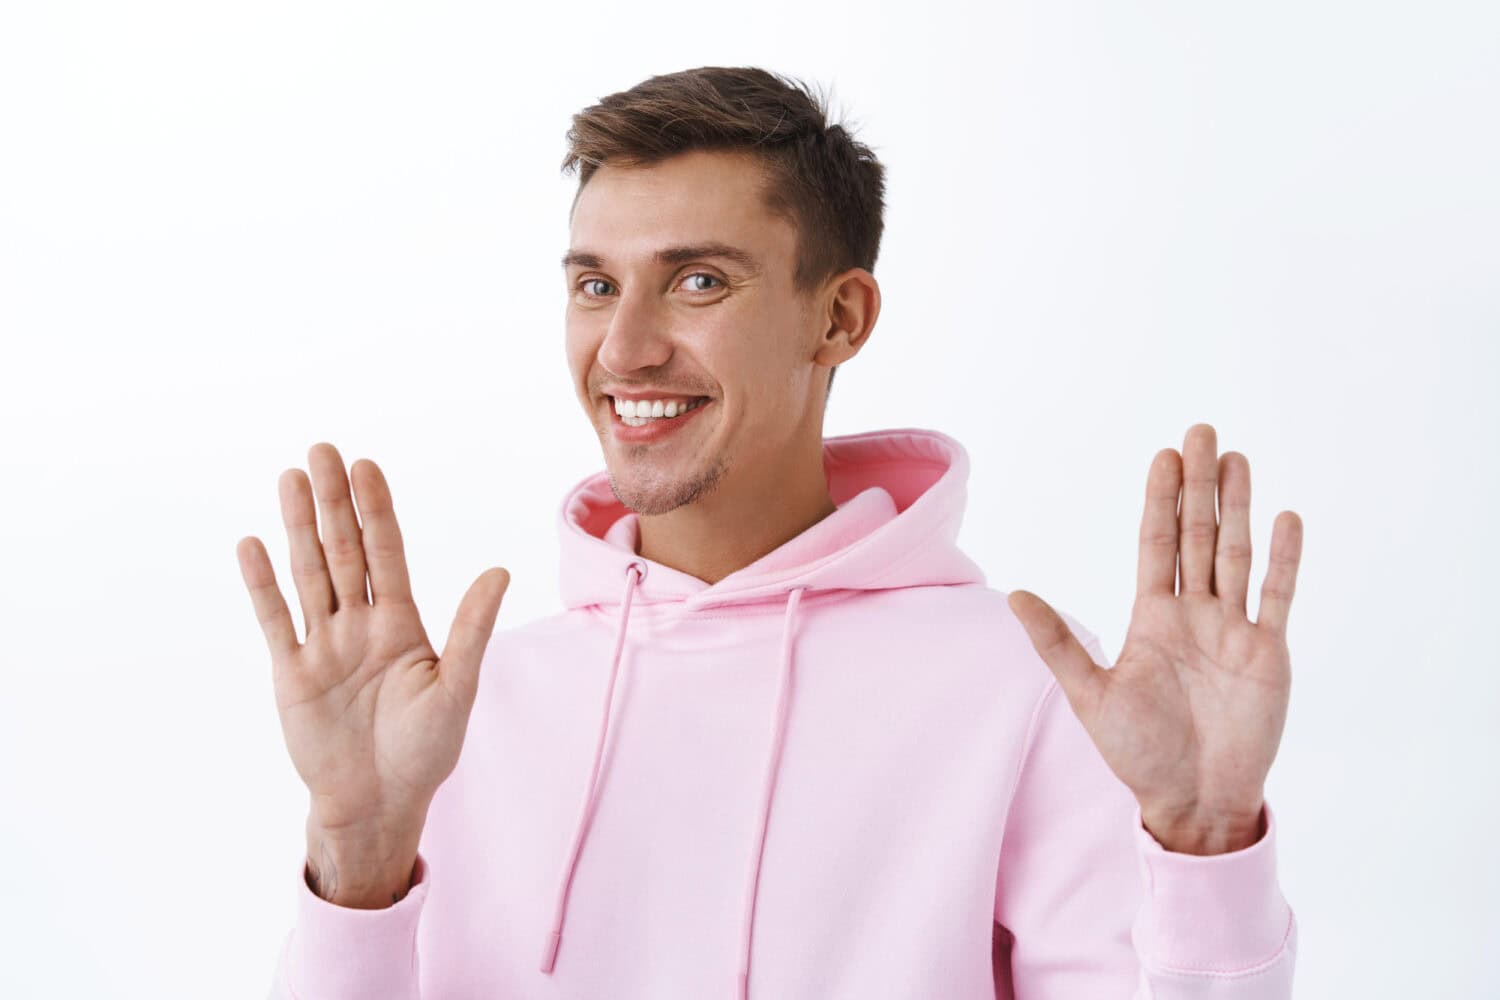 No thank you, I am okay. Portrait of handsome smiling blond man in pink hoodie, raising hands in surrender or sorry gesture, refuse or rejecting offer politely, standing white background